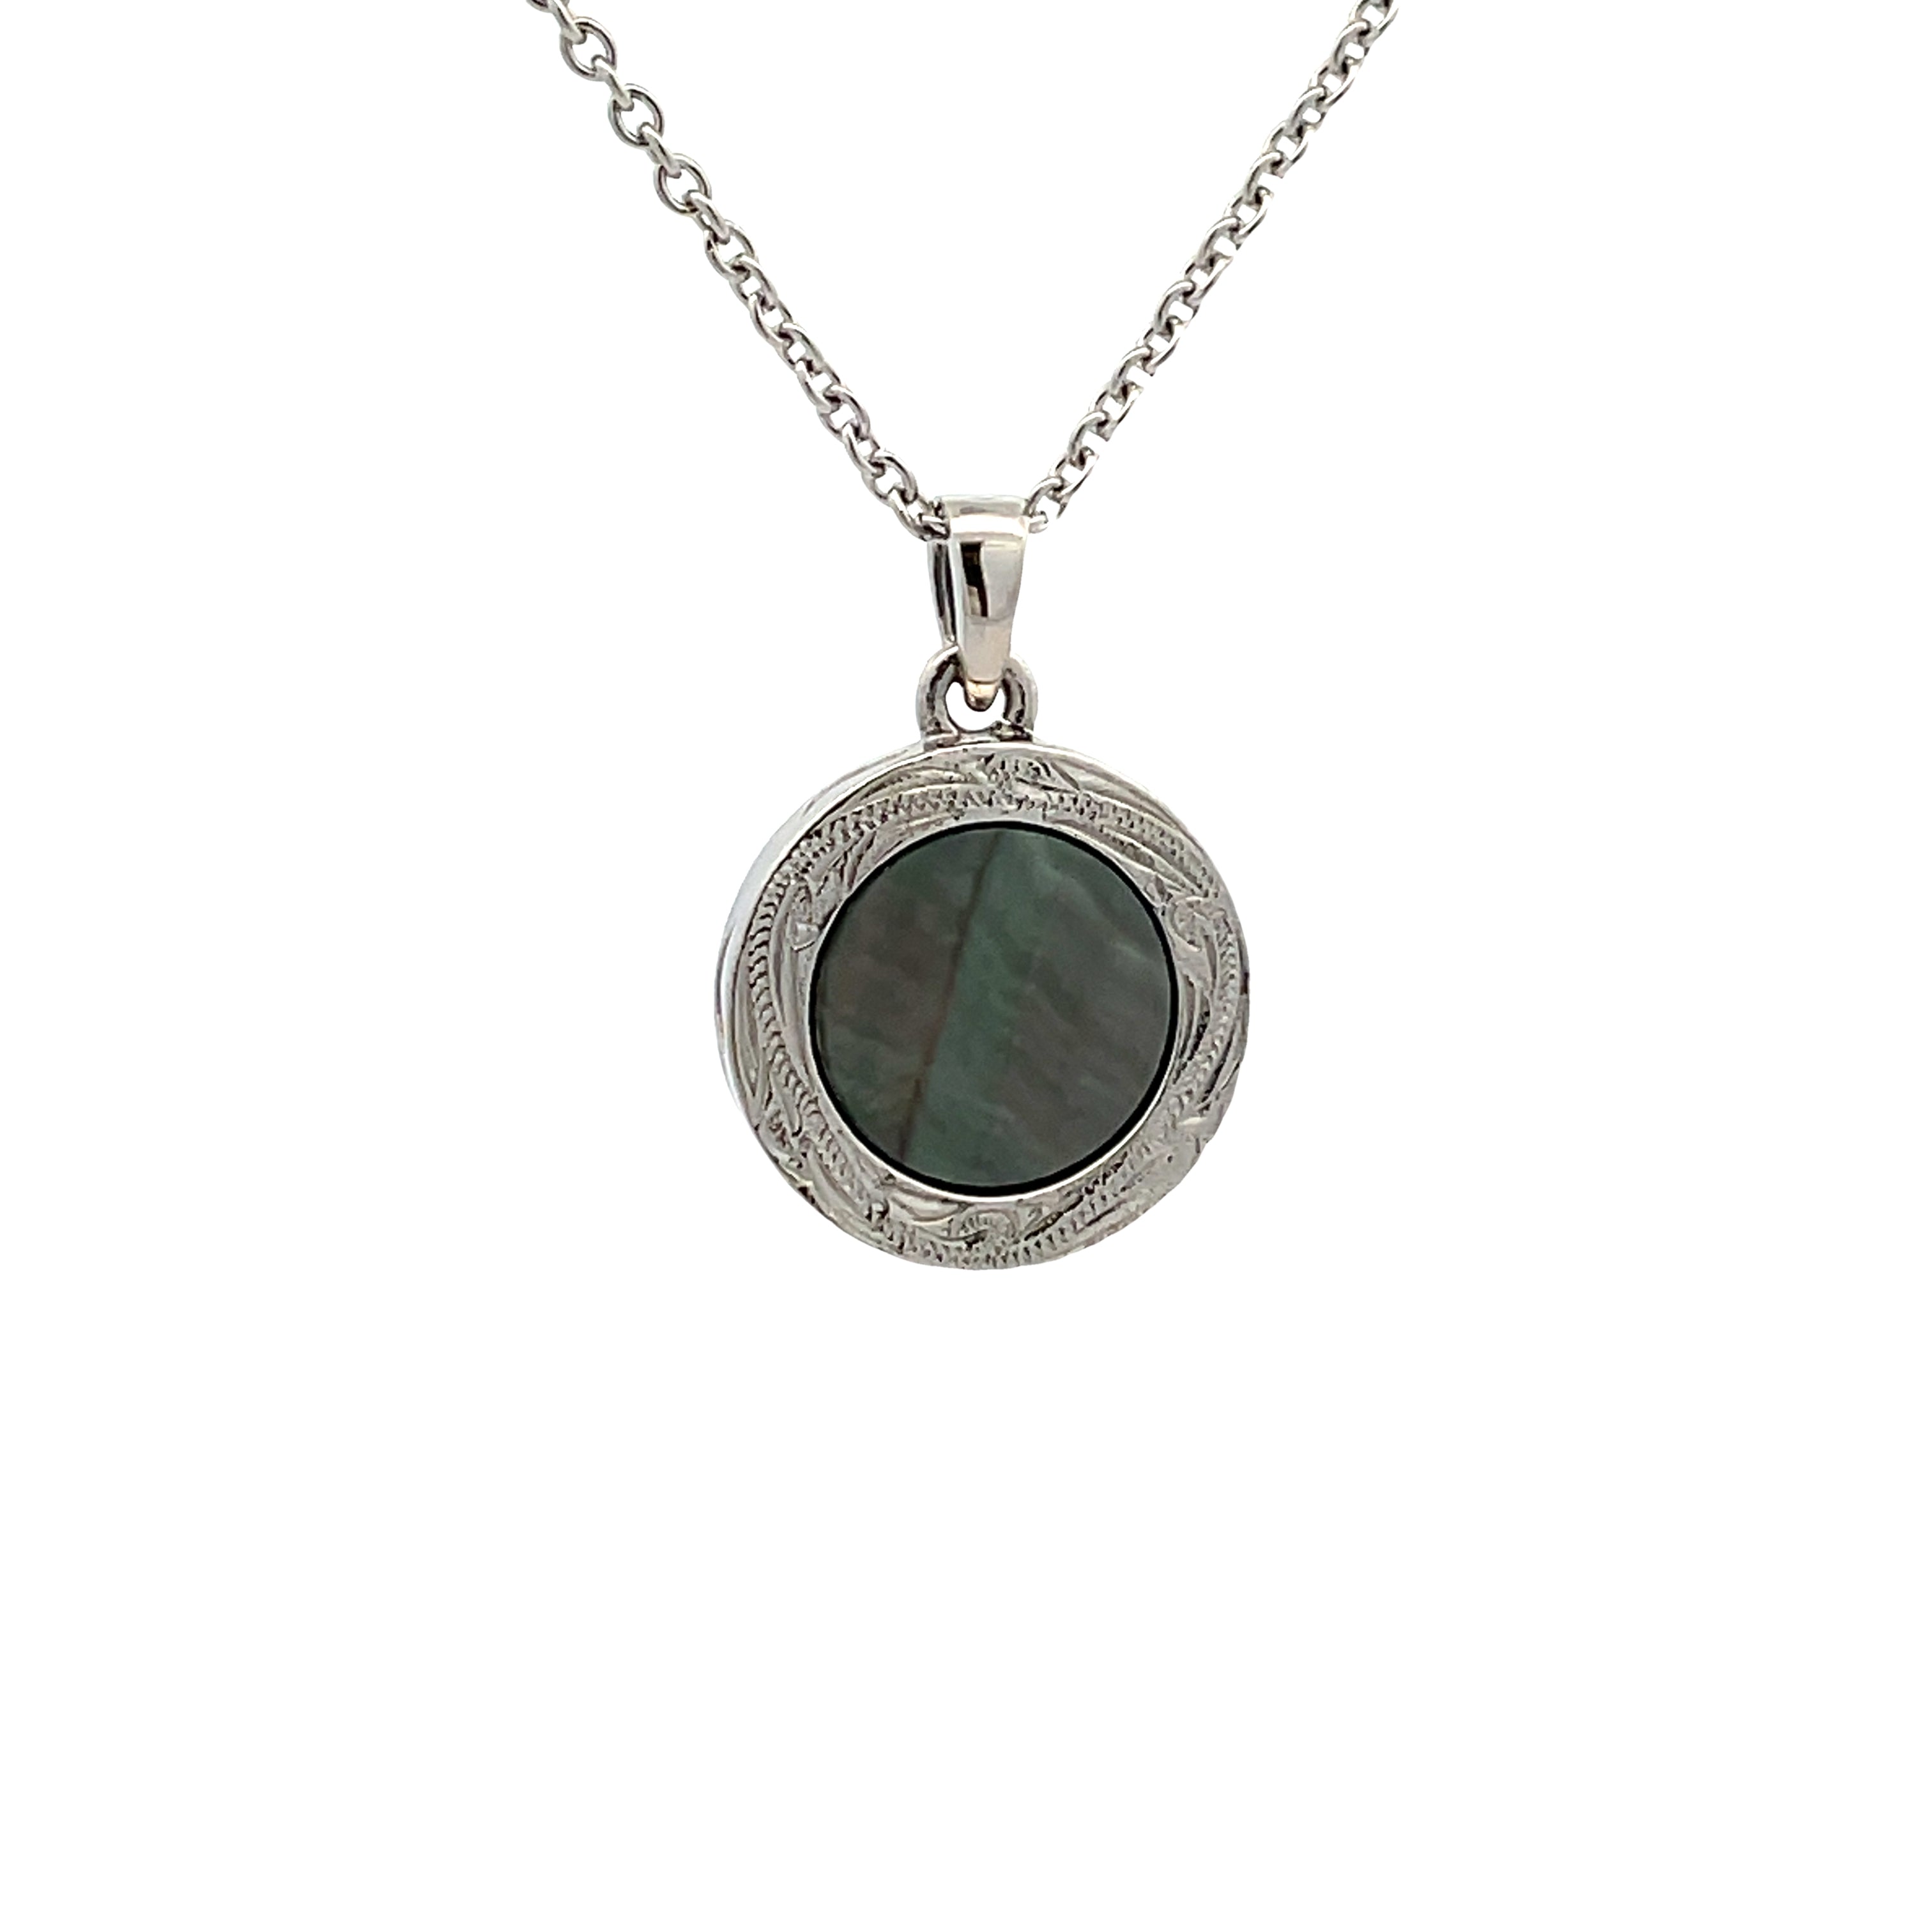 Stainless Steel Black Mother Of Pearl Delicate Disc Necklace